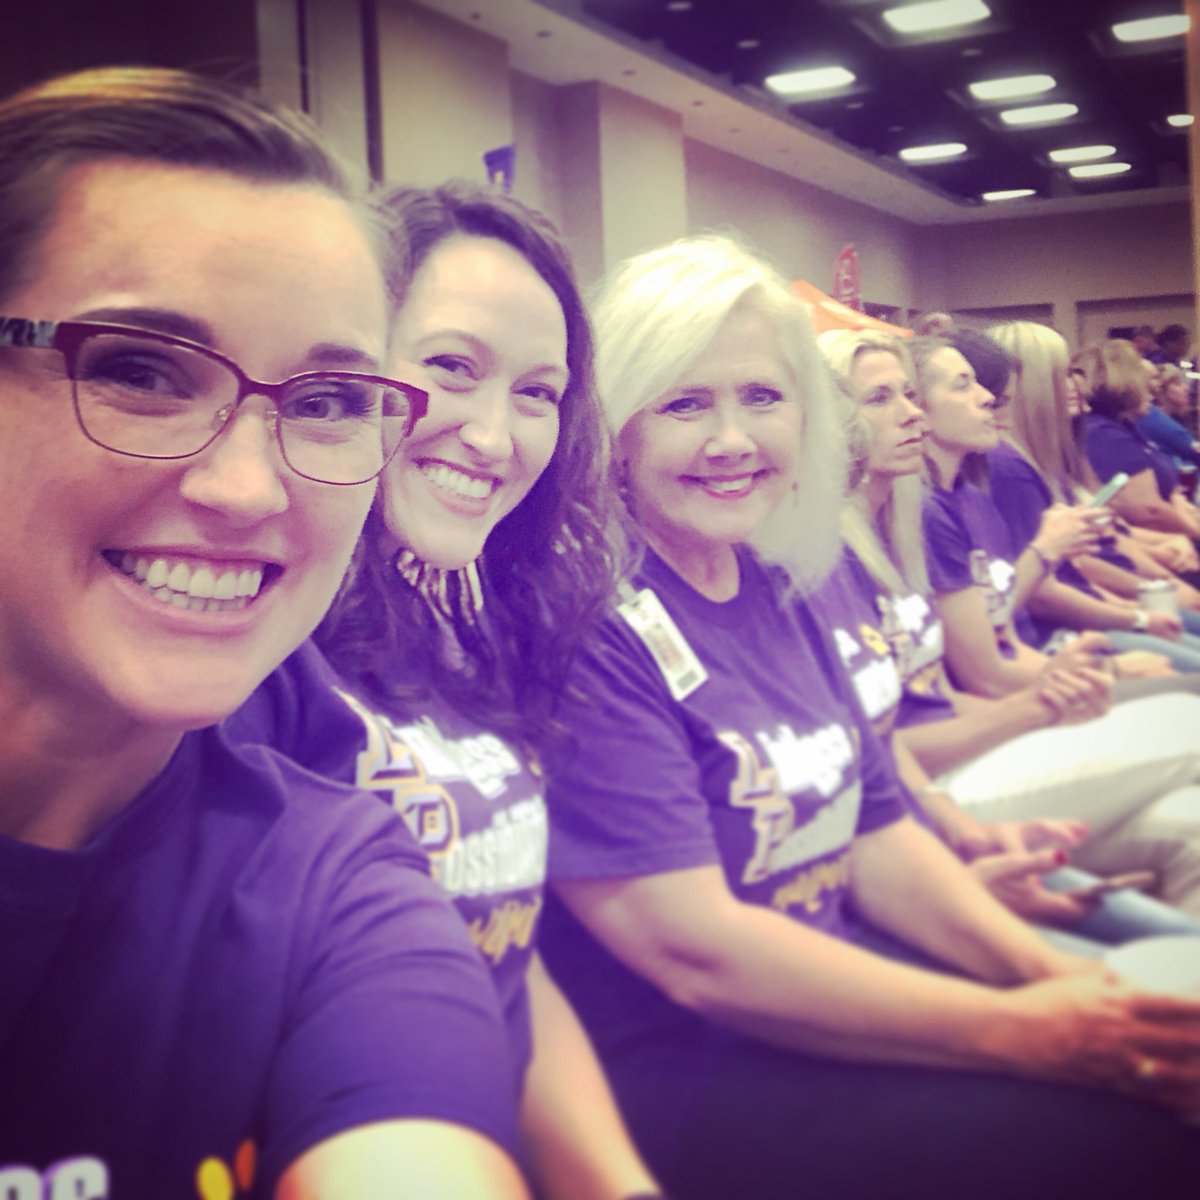 💜🐾💛FCS in the house! #NoLimits #convocation #LufkinU